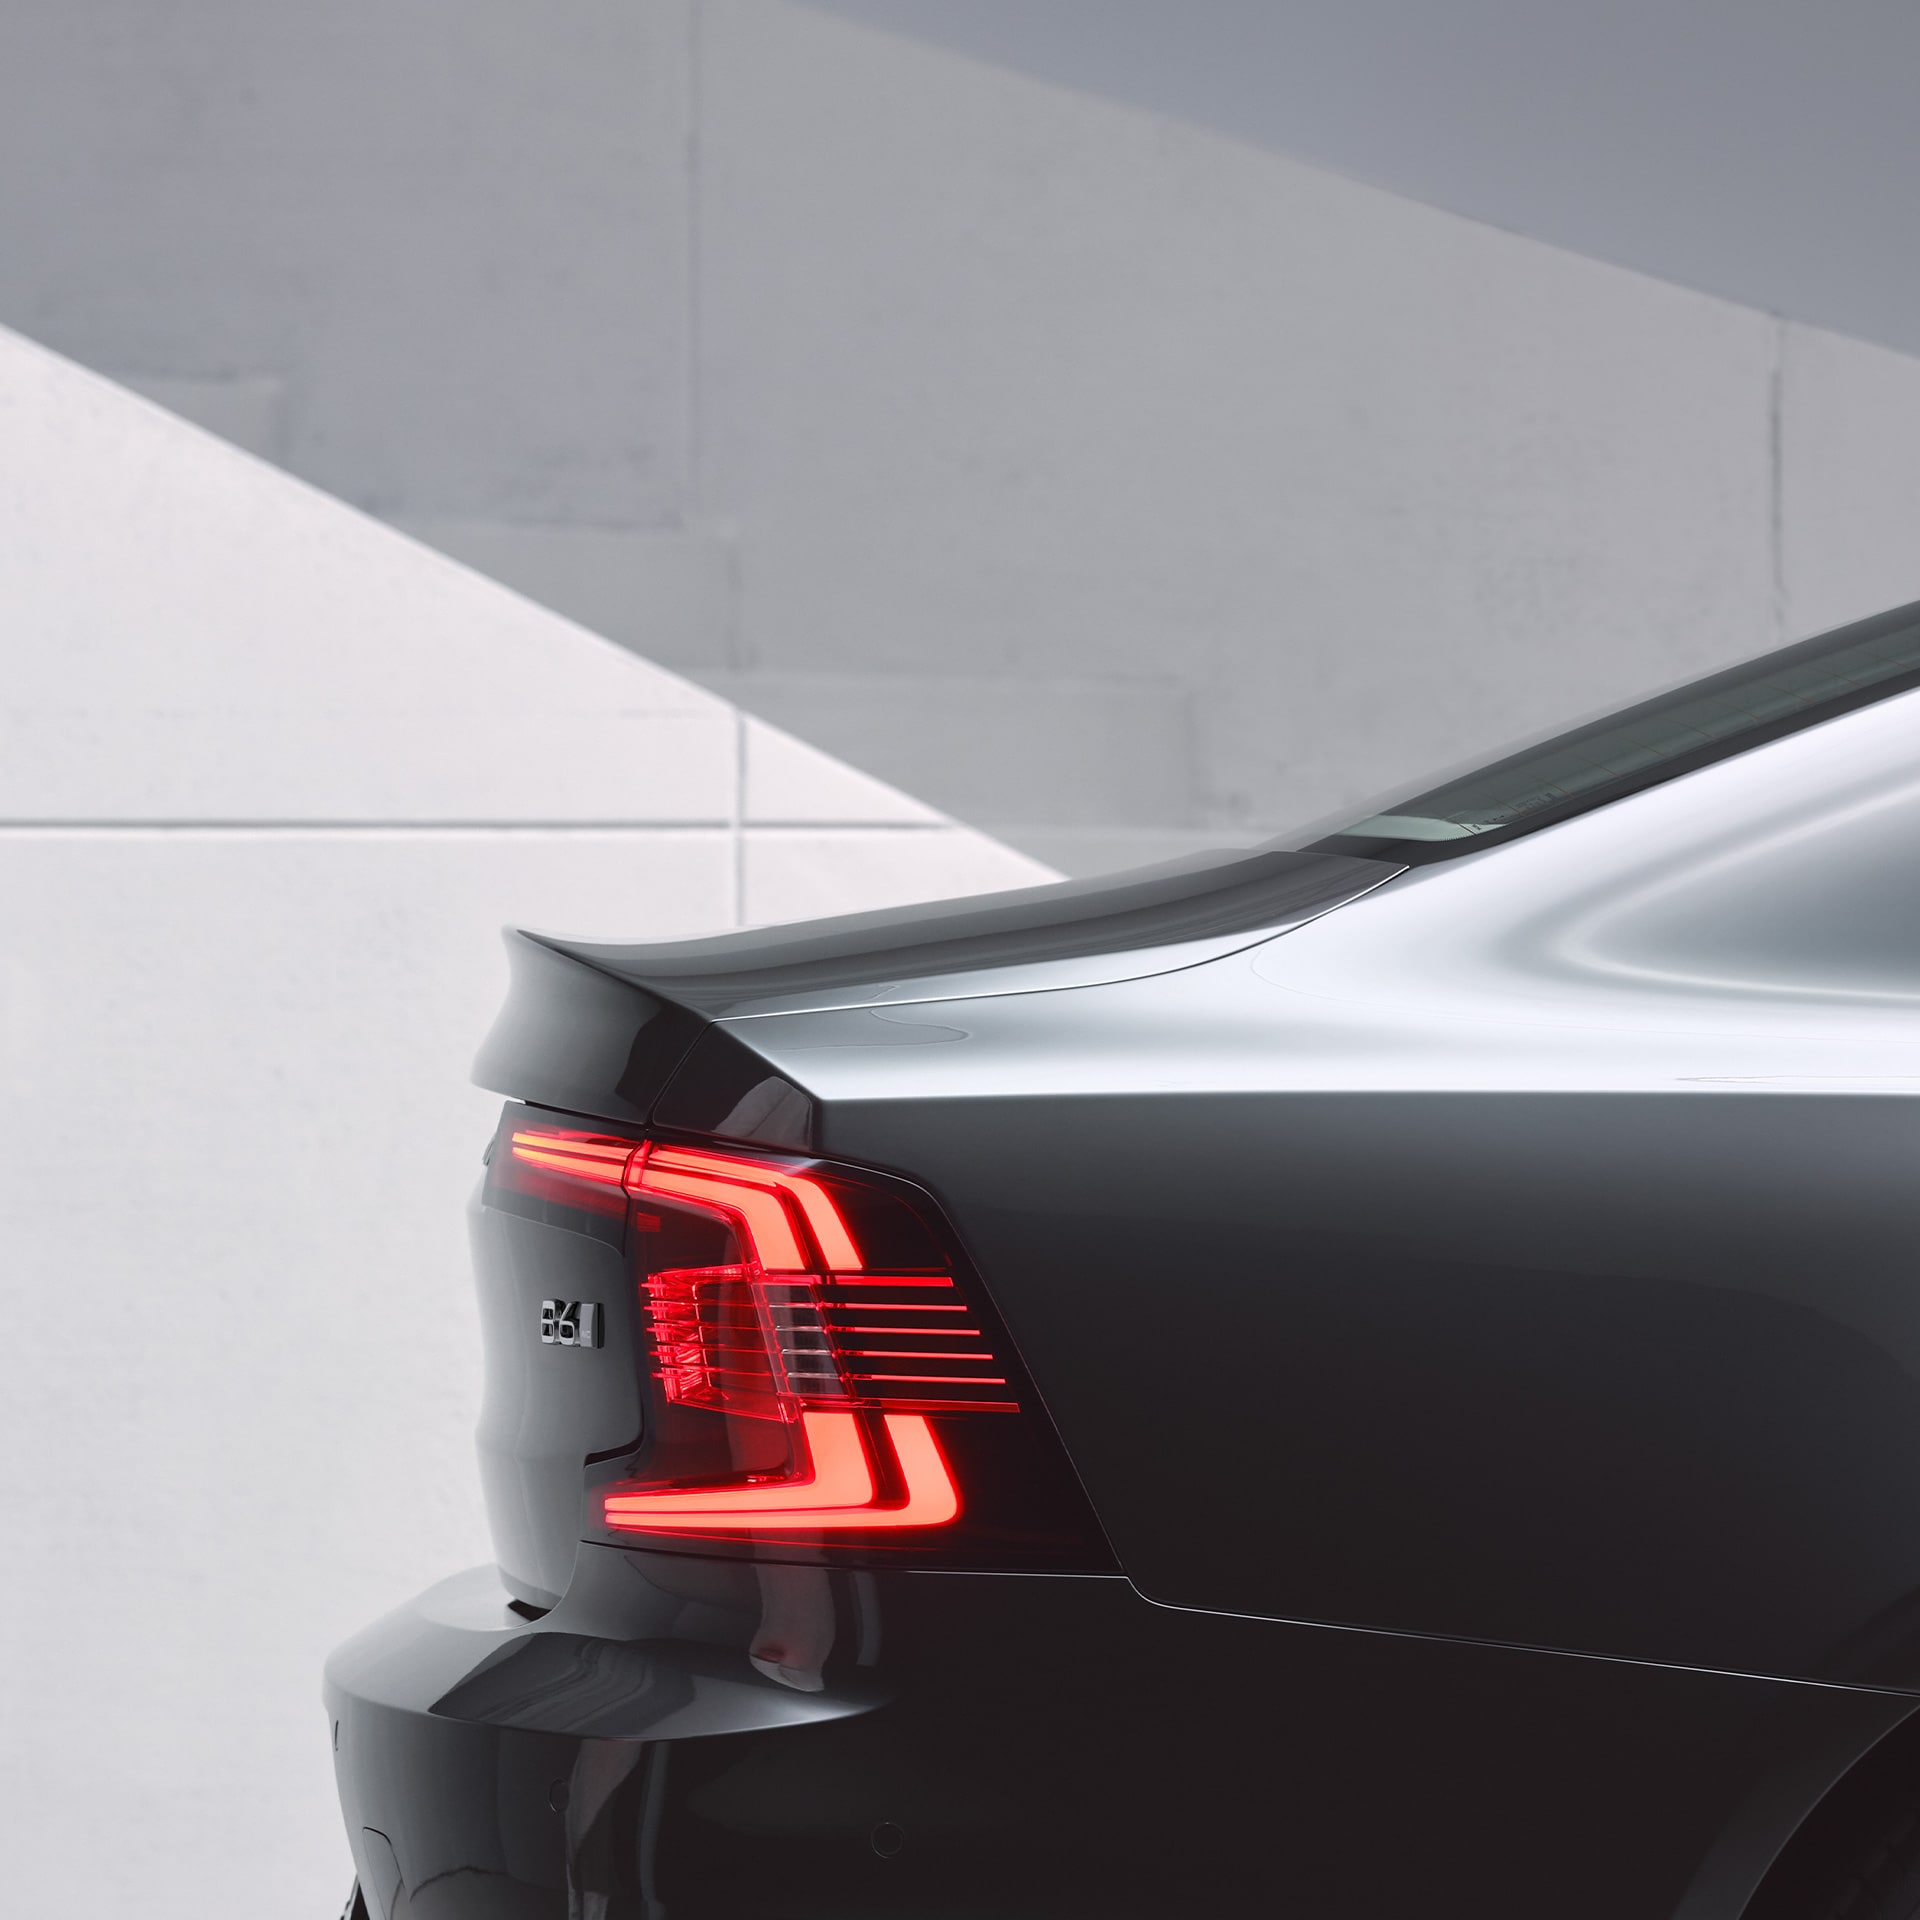 Rear view of Volvo S90 with full LED rear lamps.